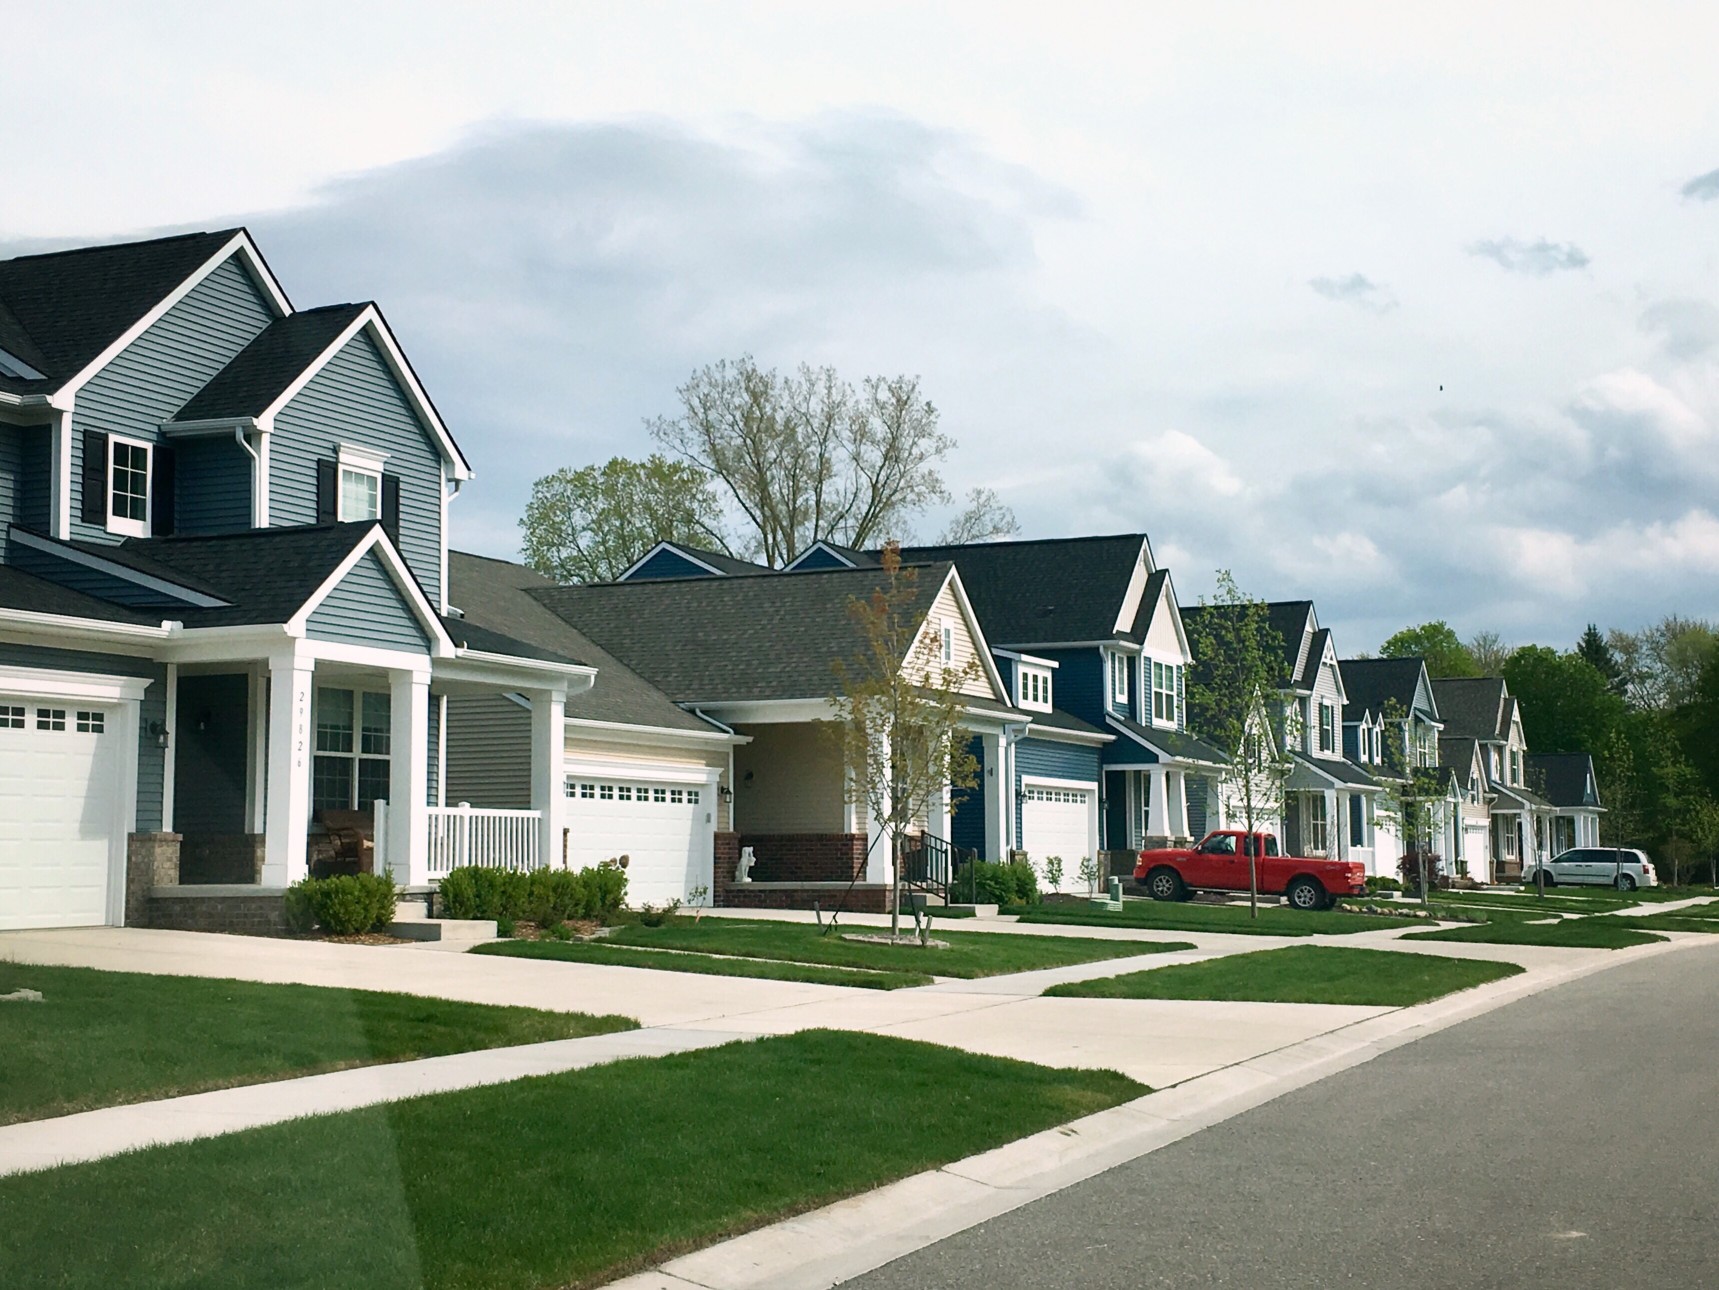 homes in a suburban area